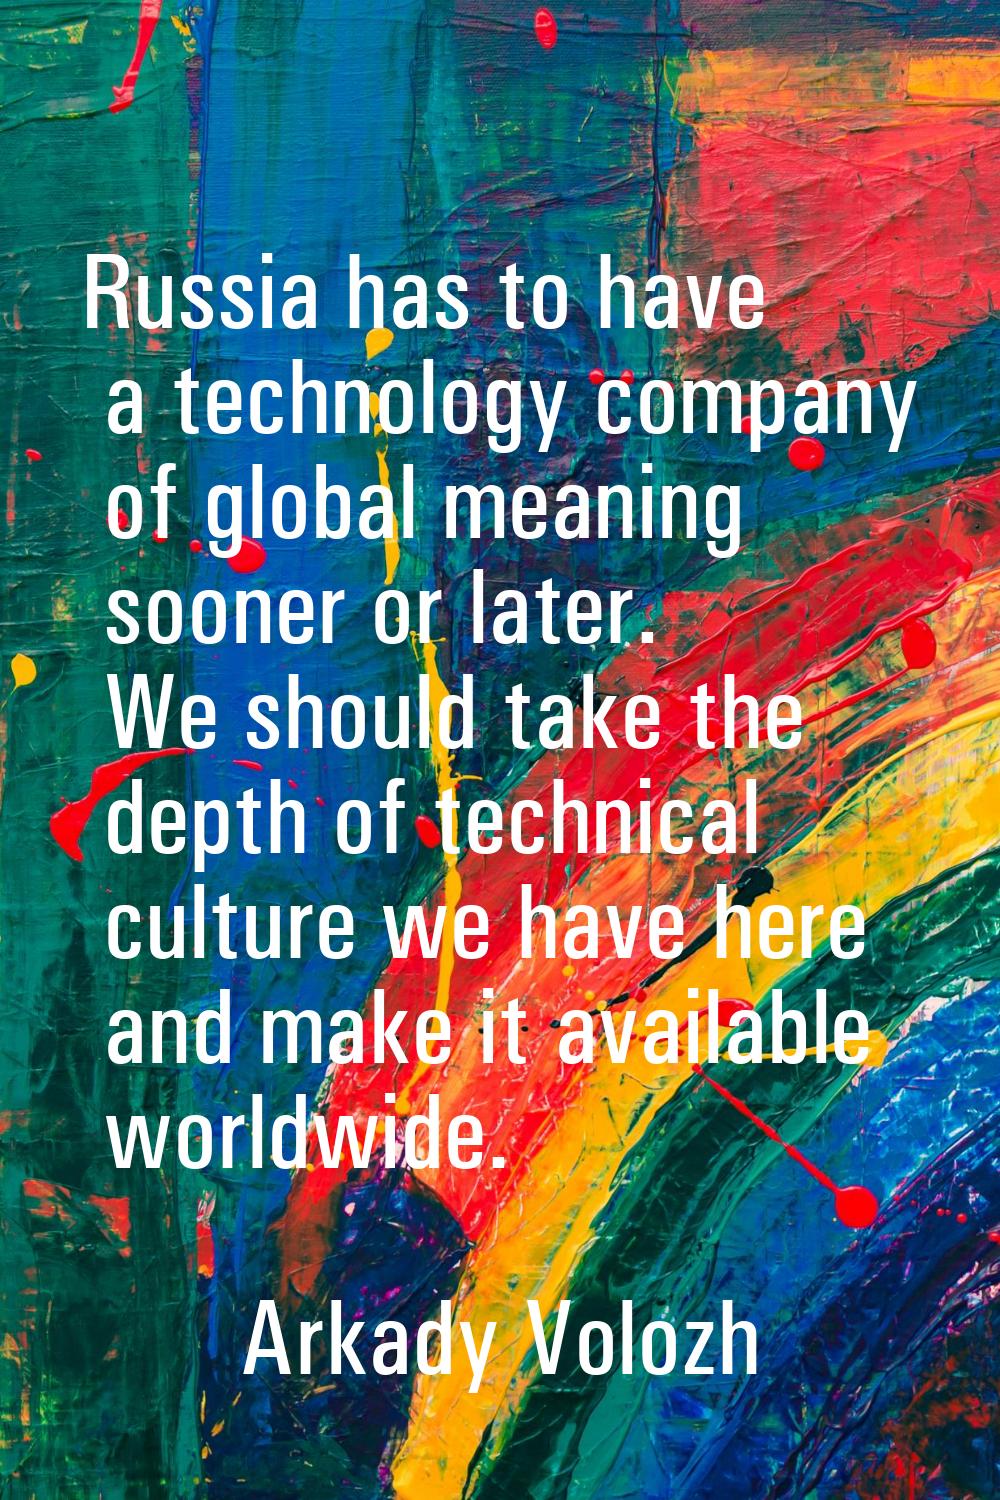 Russia has to have a technology company of global meaning sooner or later. We should take the depth